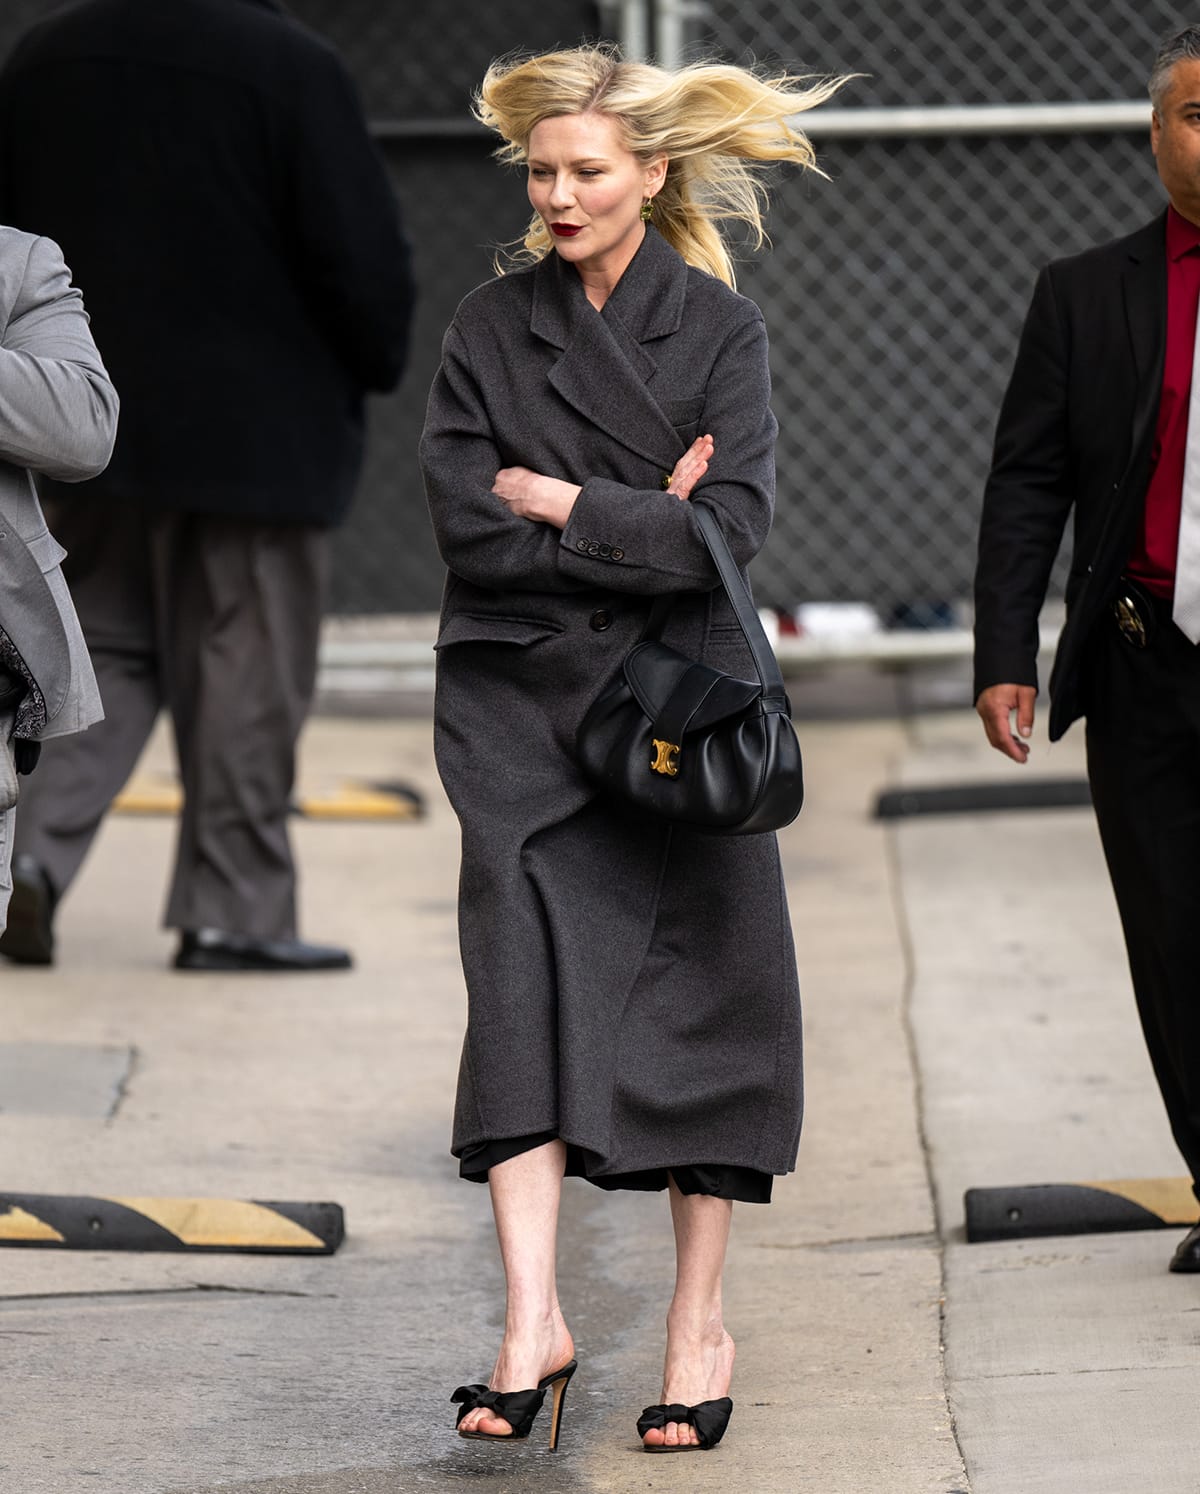 Kirsten Dunst heads to Jimmy Kimmel Live studios in an oversized gray coat, a black Lanvin dress, and a pair of black mules to discuss Civil War on April 4, 2024